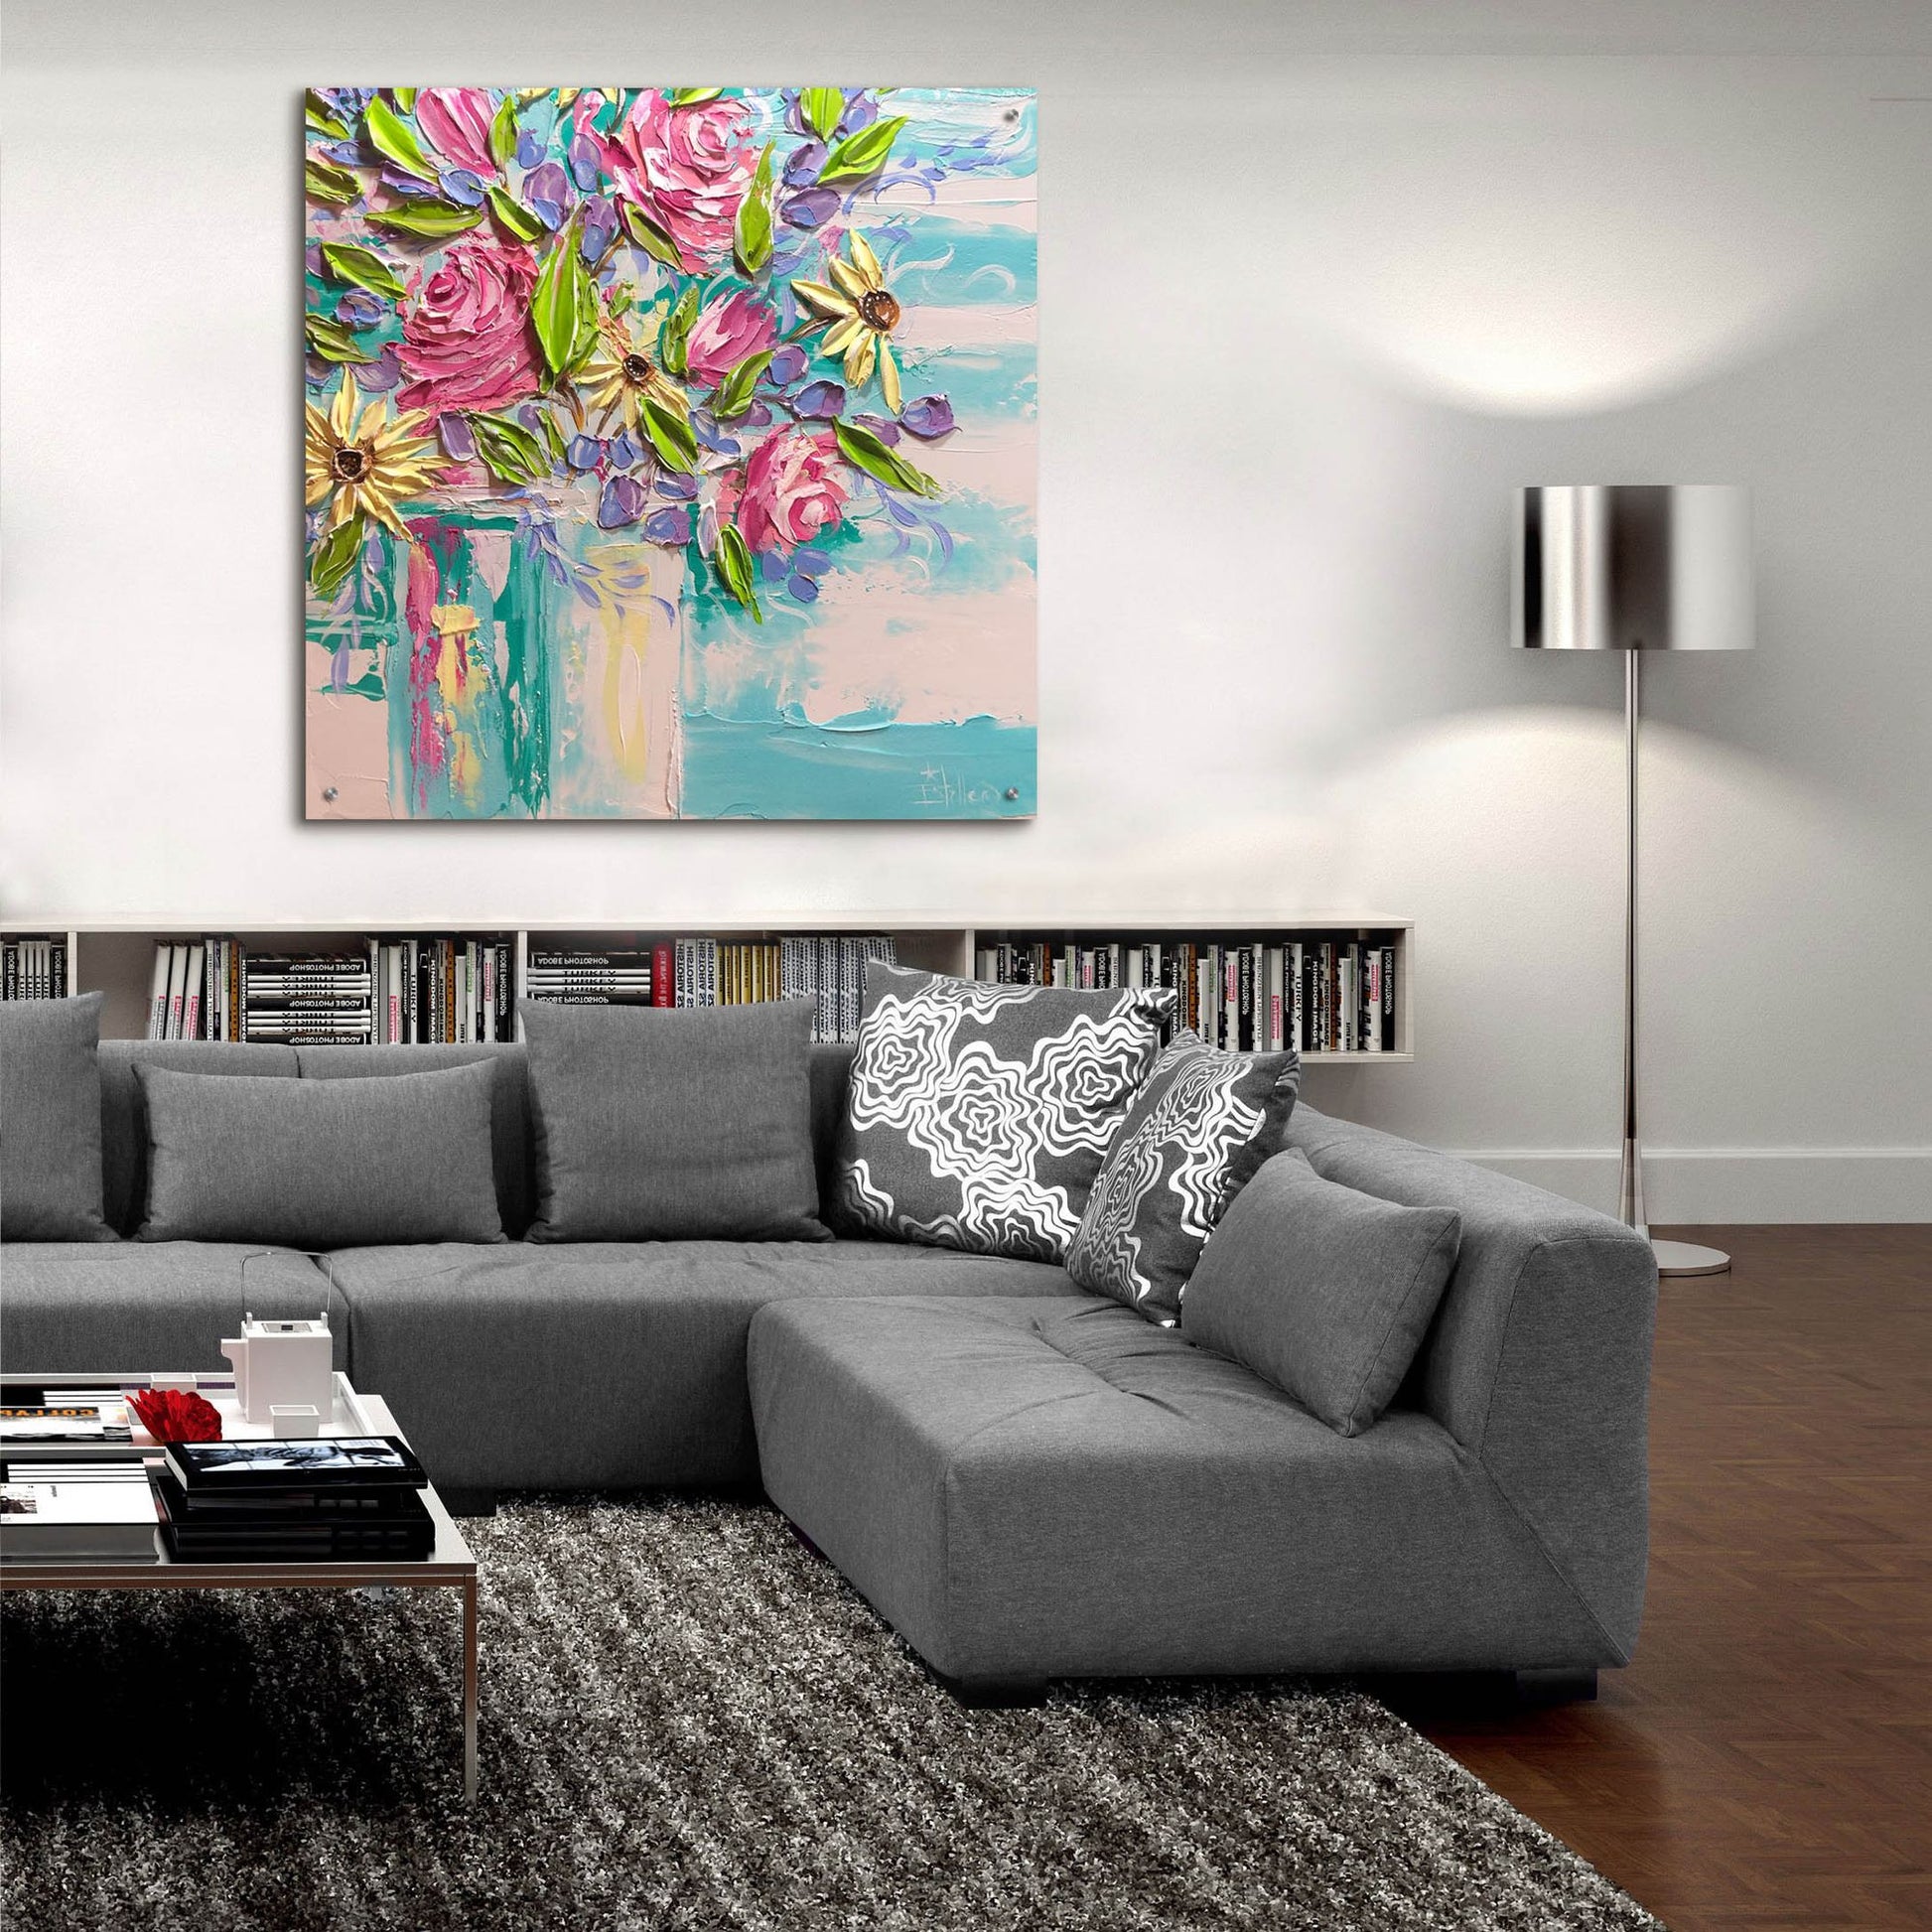 Epic Art 'Floral Bliss' by Estelle Grengs, Acrylic Glass Wall Art,36x36